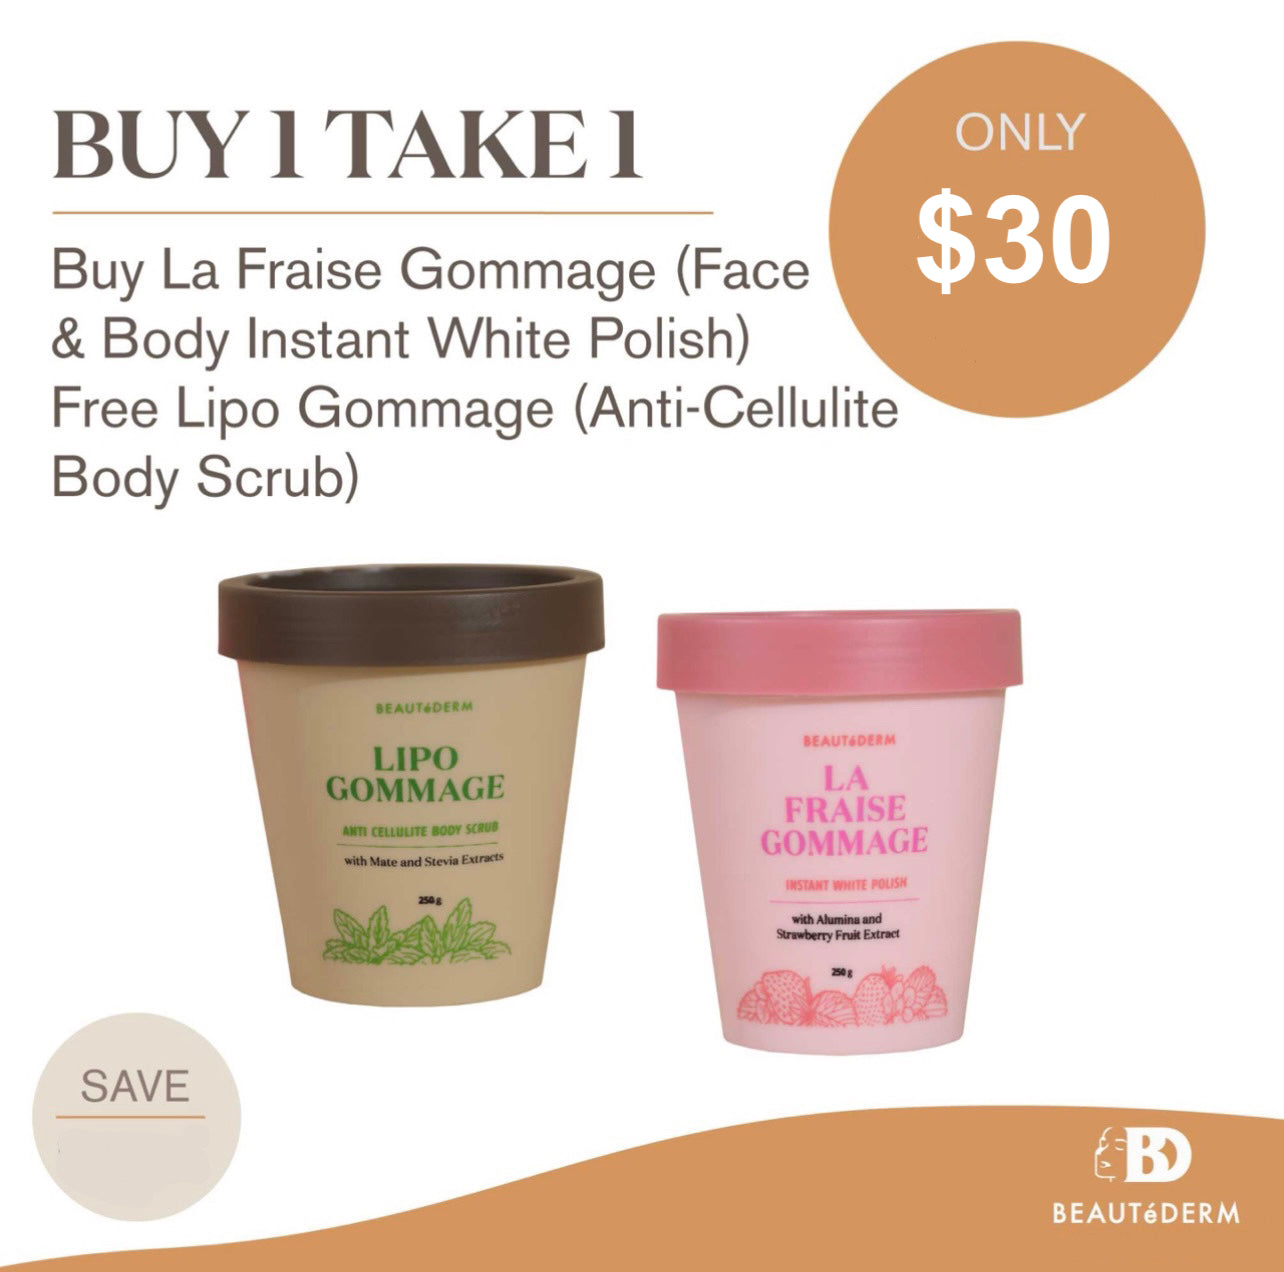 BUY La Fraise Gommage Face and Body Scrub GET Lipo Gommage FREE